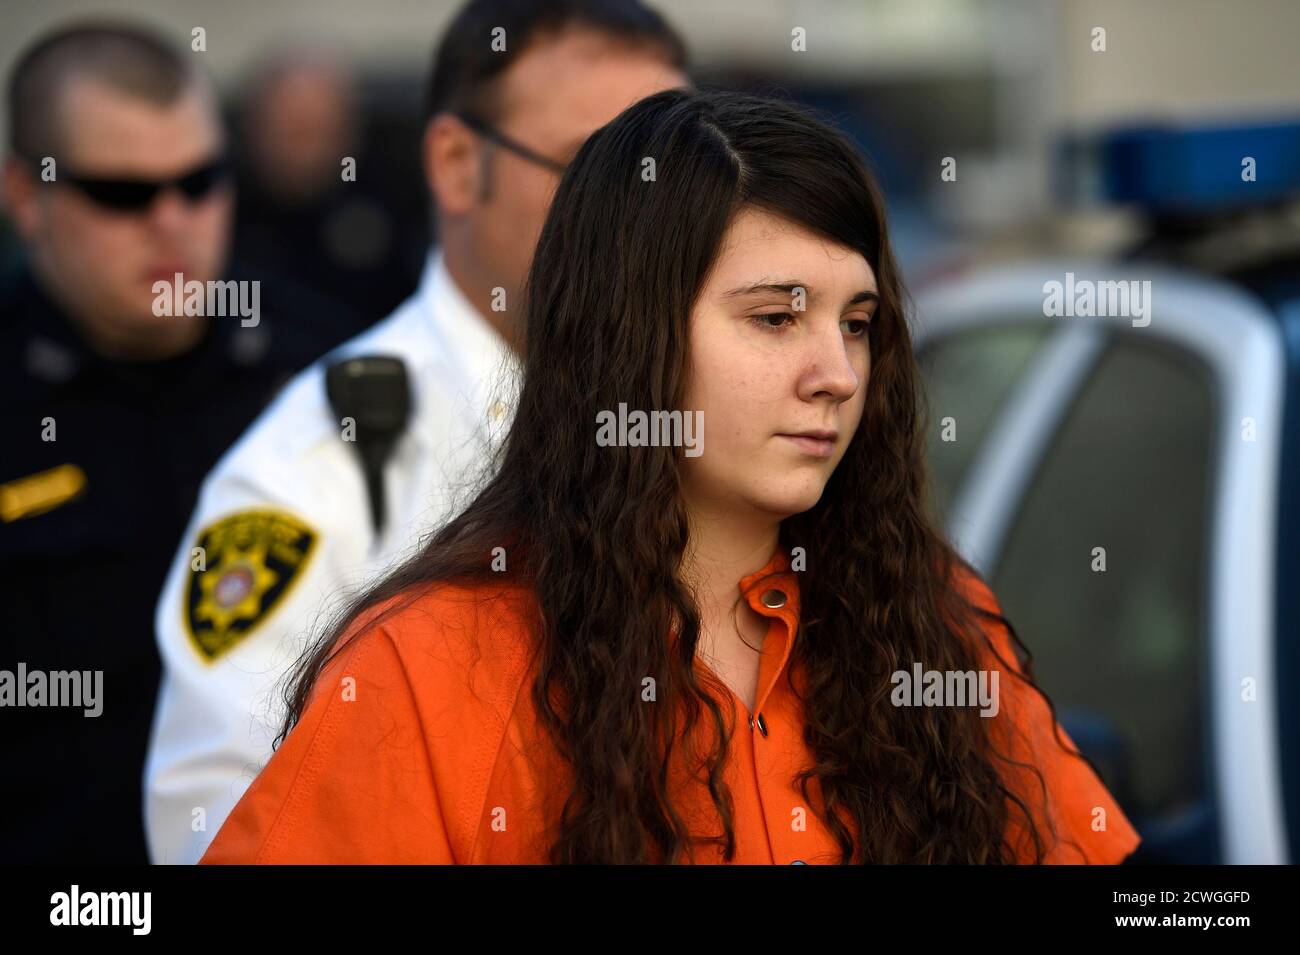 Miranda Barbour, 19, the woman dubbed the so-called Craigslist killer  suspect, is led into court by sheriff deputies in Sunbury, Pennsylvania  April 1, 2014. Barbour and her husband, Elytte Barbour, 22, have